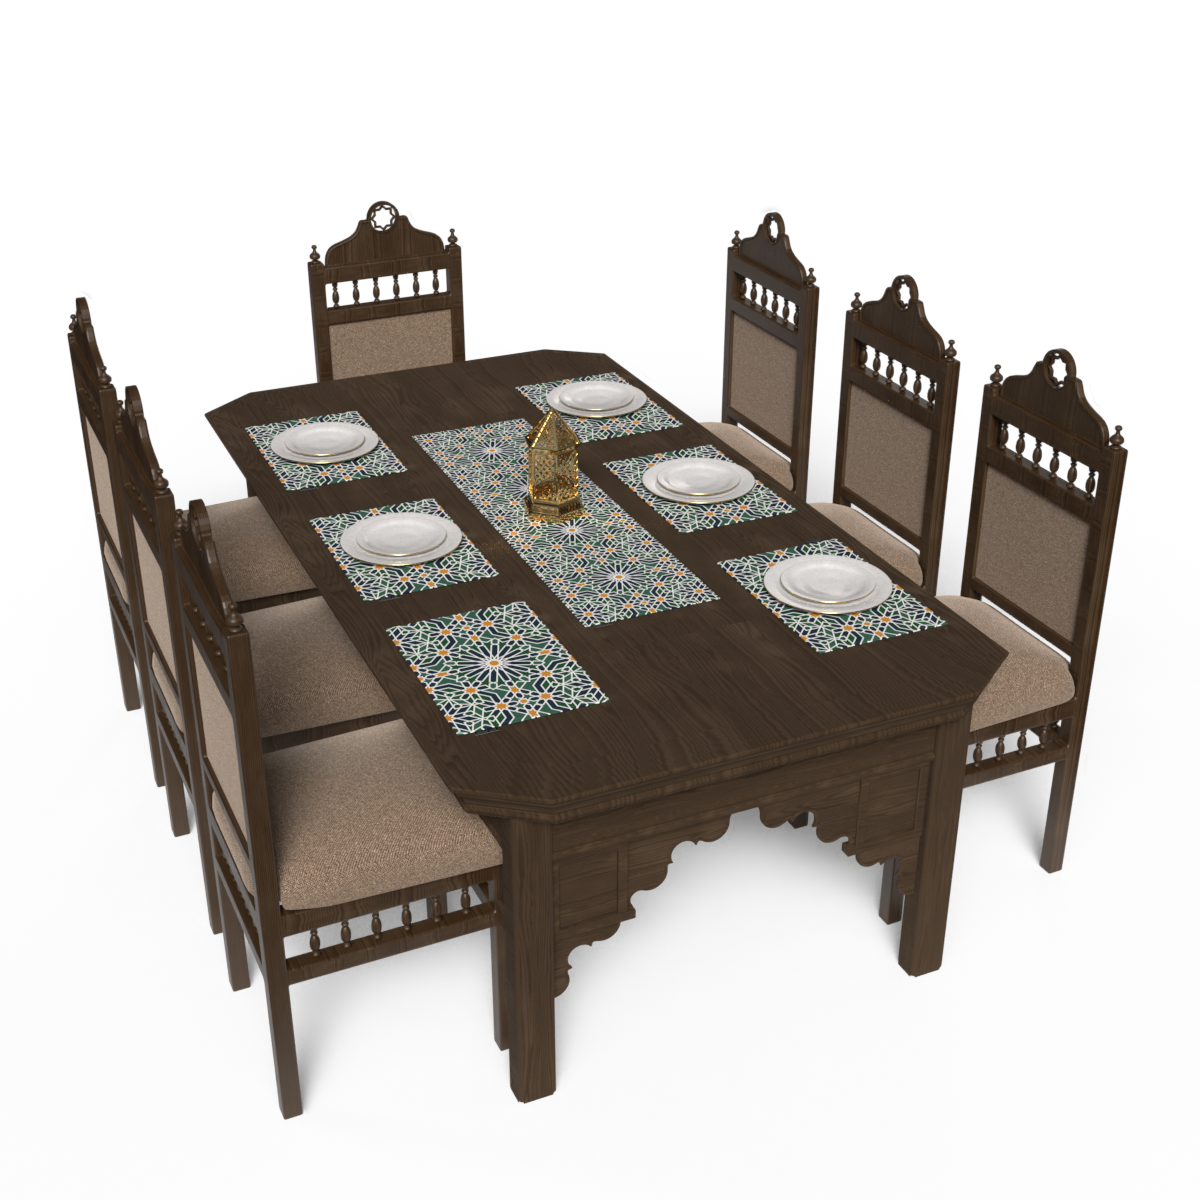 Runner and coaster set - 7 pieces - ROM29